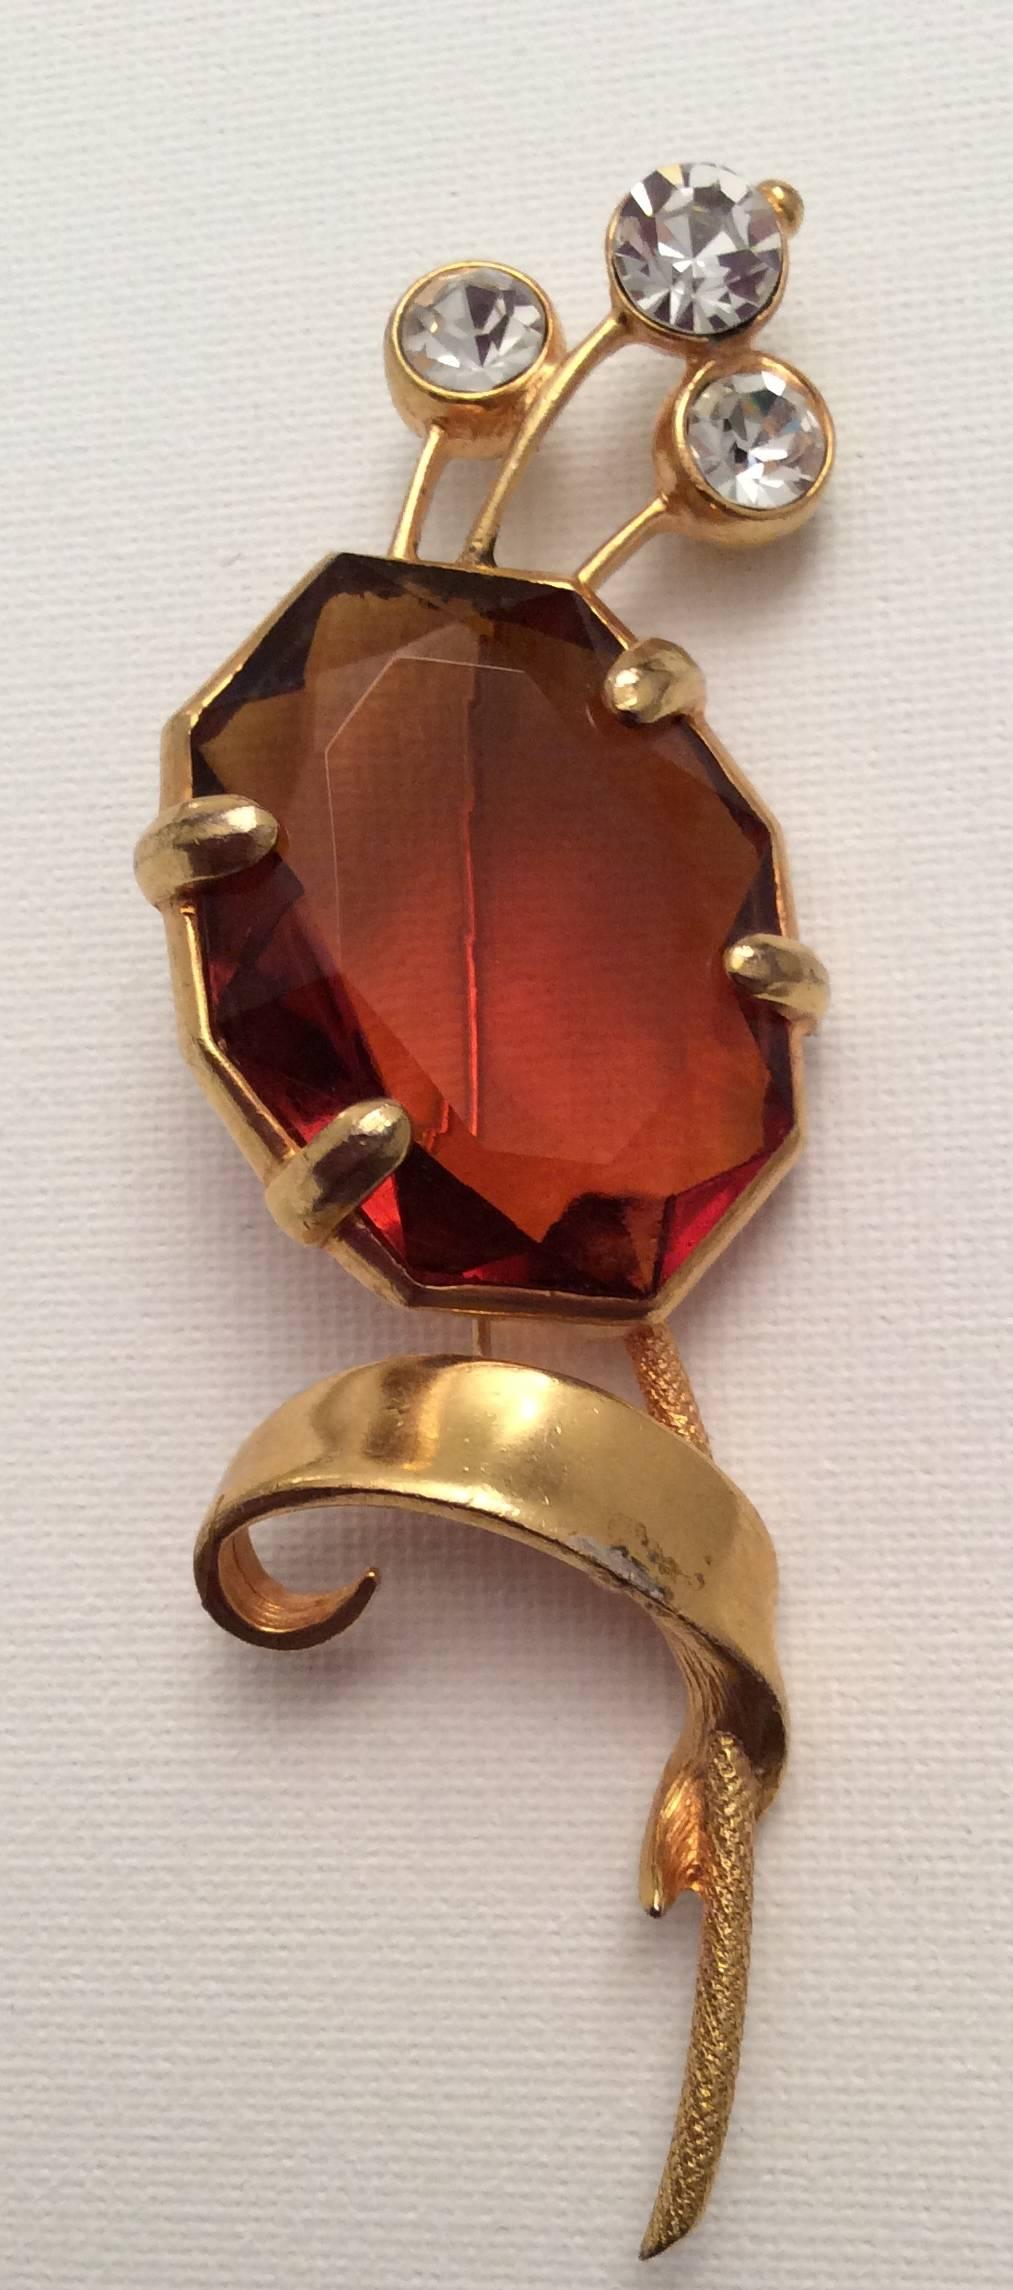 Vintage Christian Dior Brooch Pin - 1960's For Sale 5